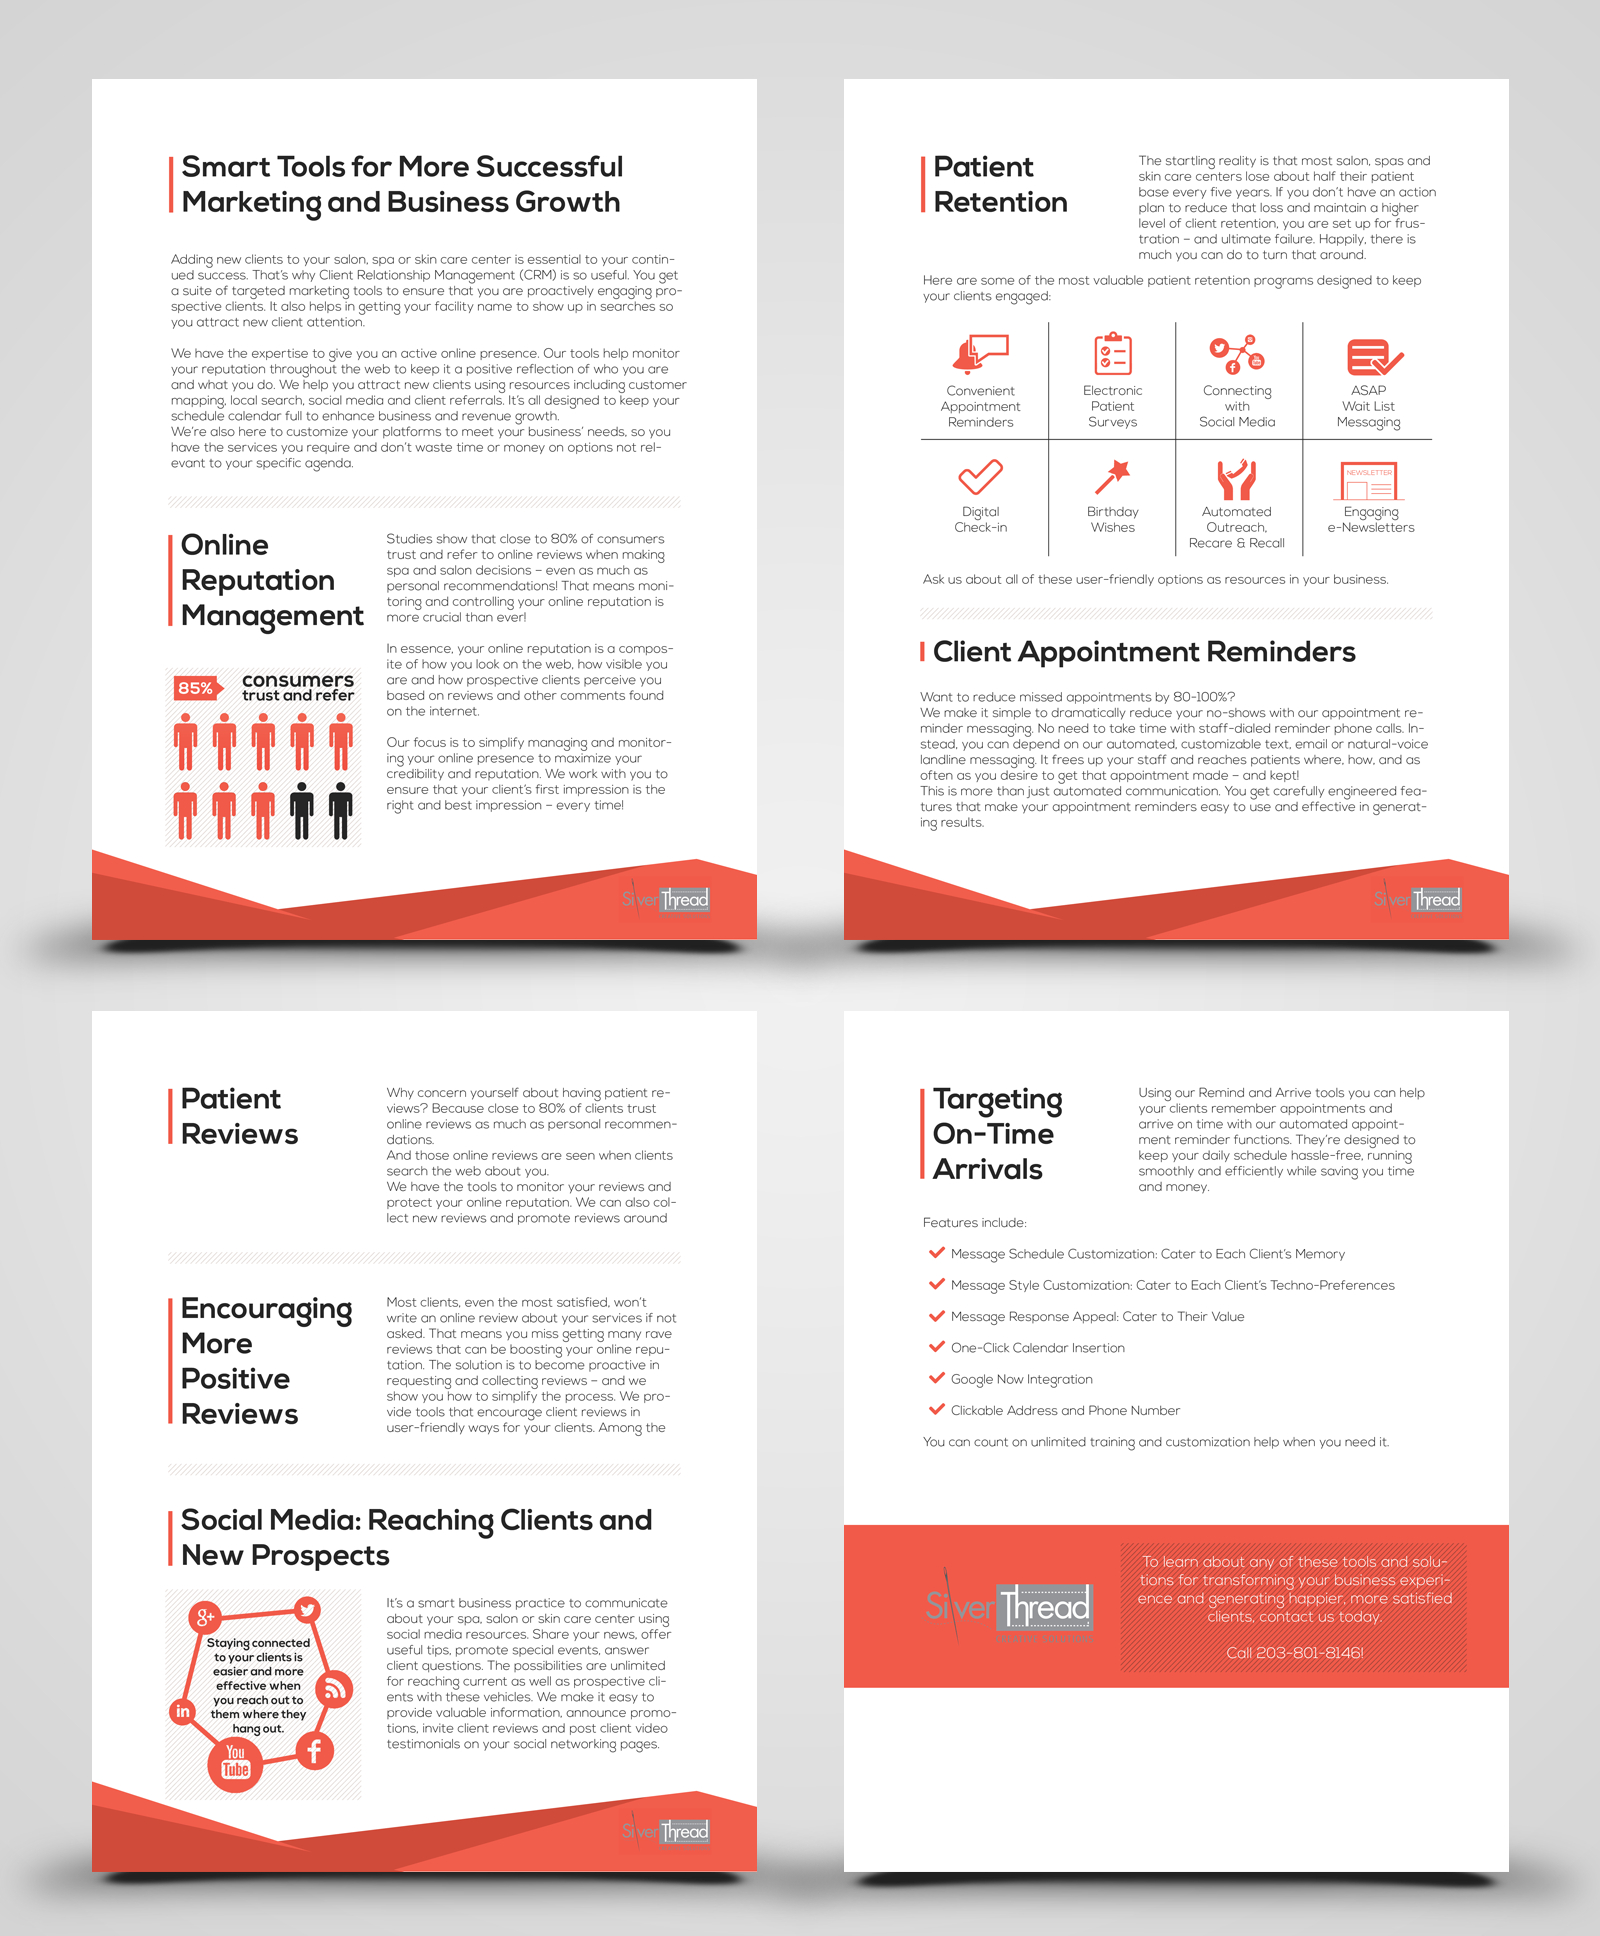 Pincassie Mascarenhas On Adverts | Case Study Design Intended For White Paper Report Template